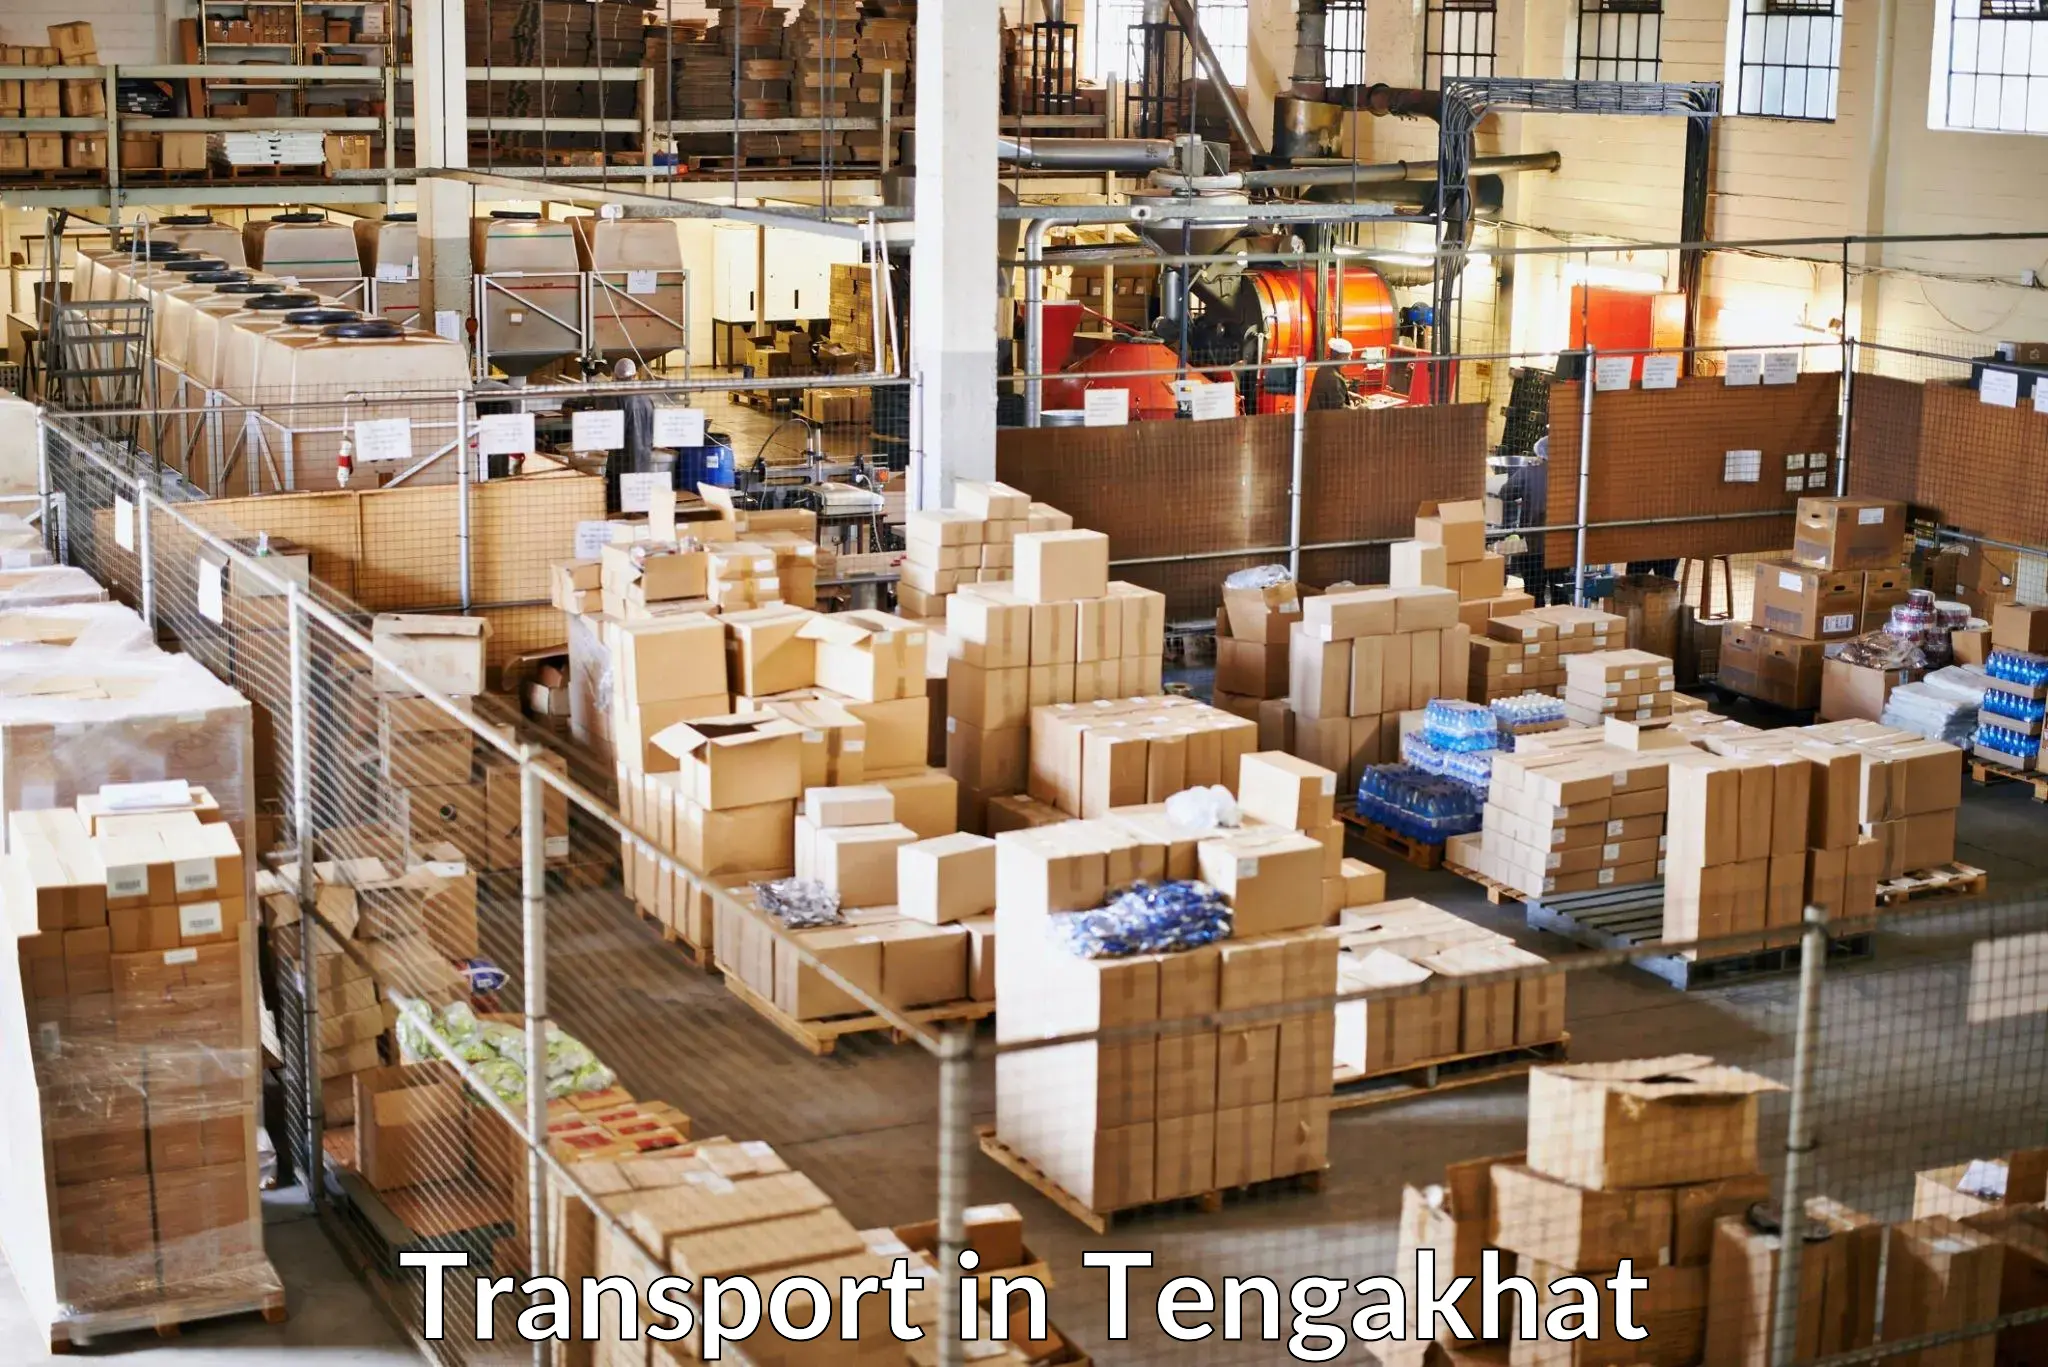 Cargo train transport services in Tengakhat